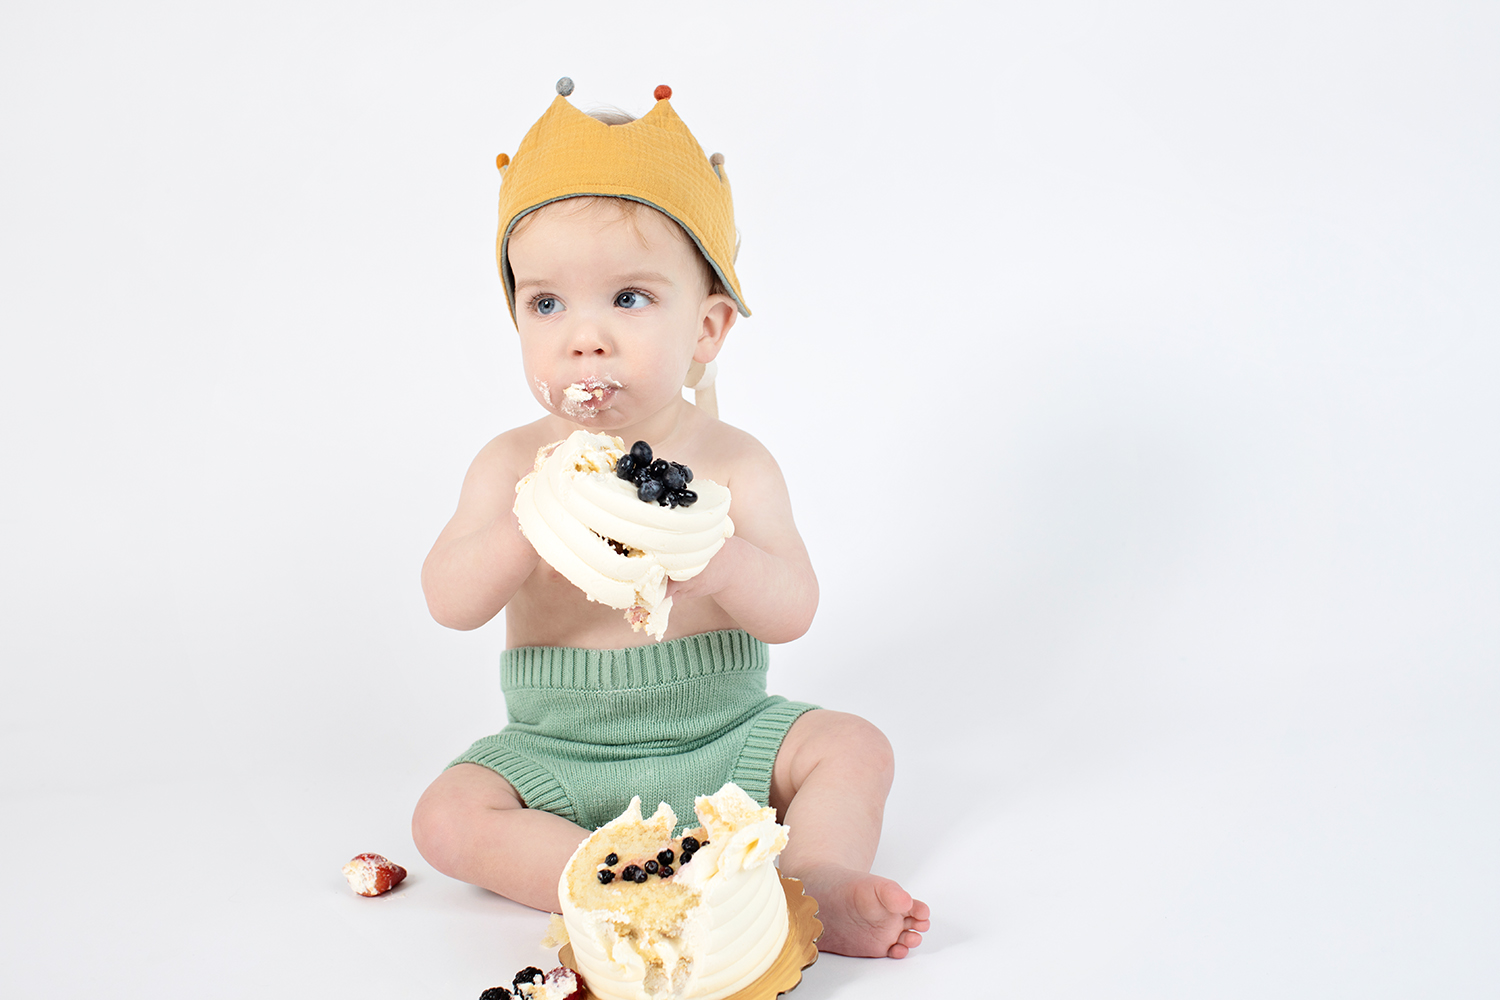 an adorable baby's hands are covered in cake frosting